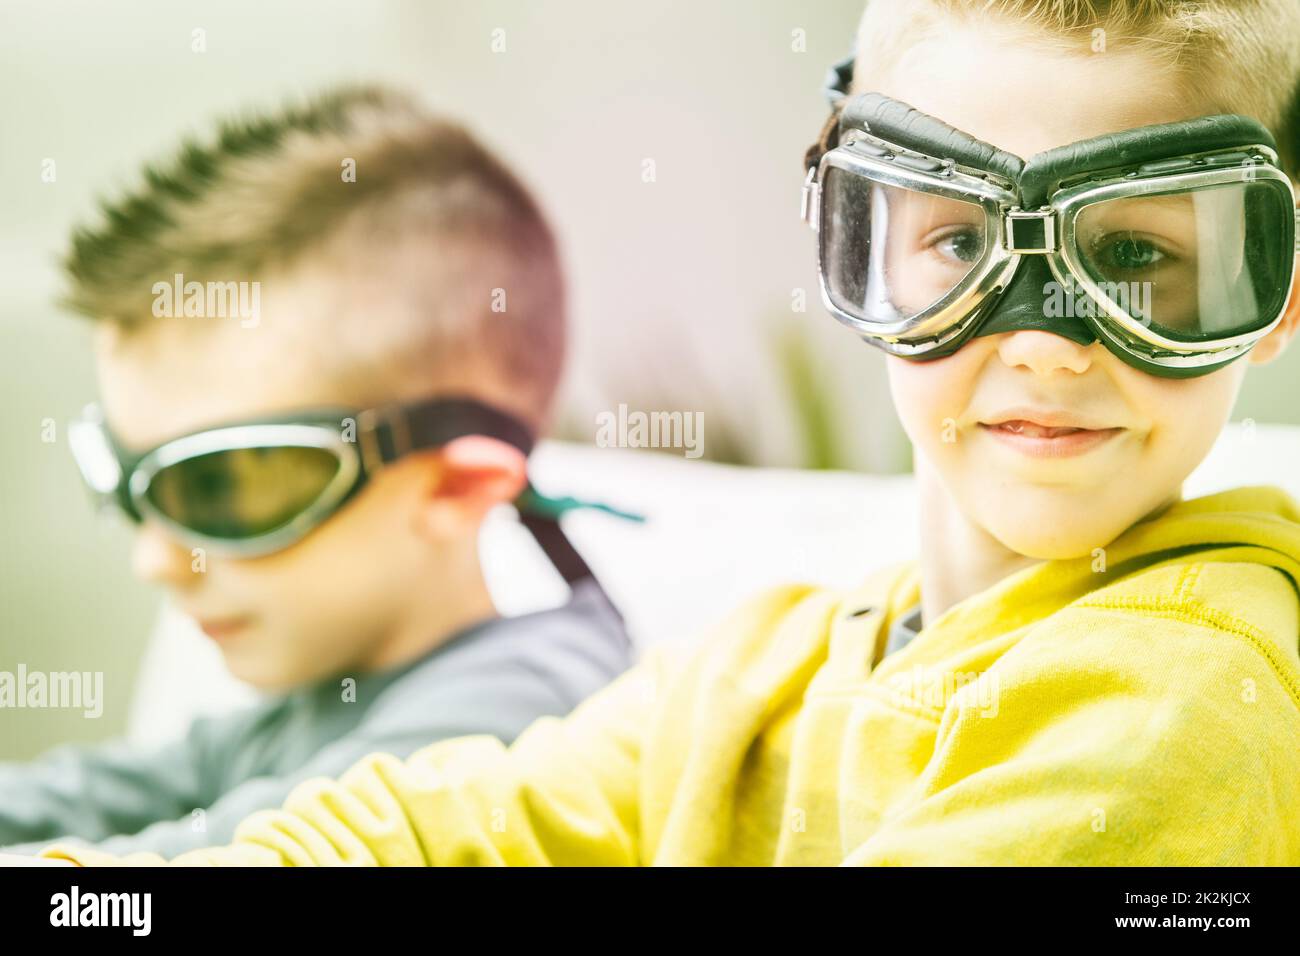 Cute high key portrait of a young boy wearing goggles Stock Photo